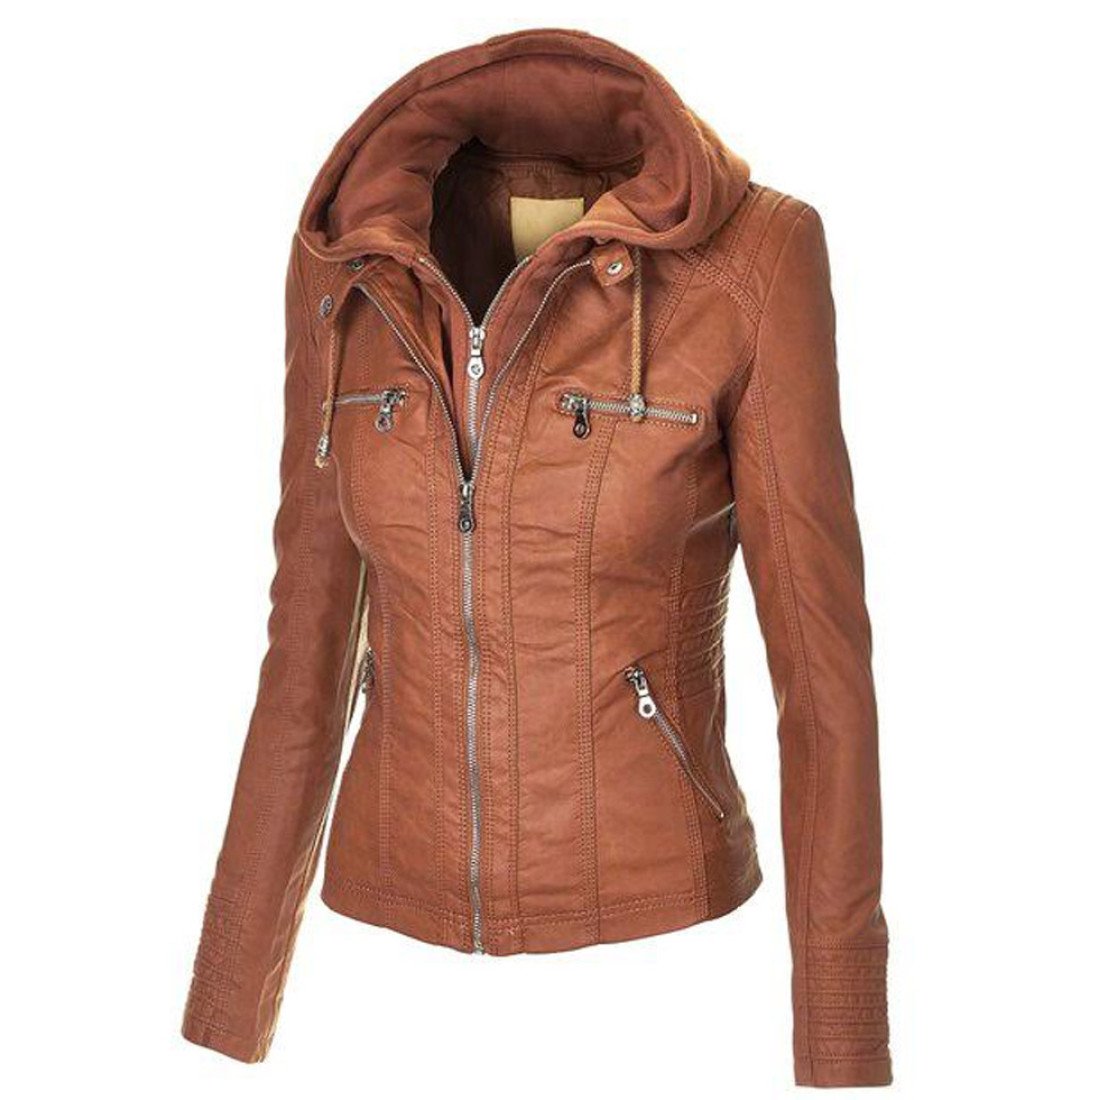 Brown Faux Leather Jacket - Womens Jacket With Hood - Films Jackets